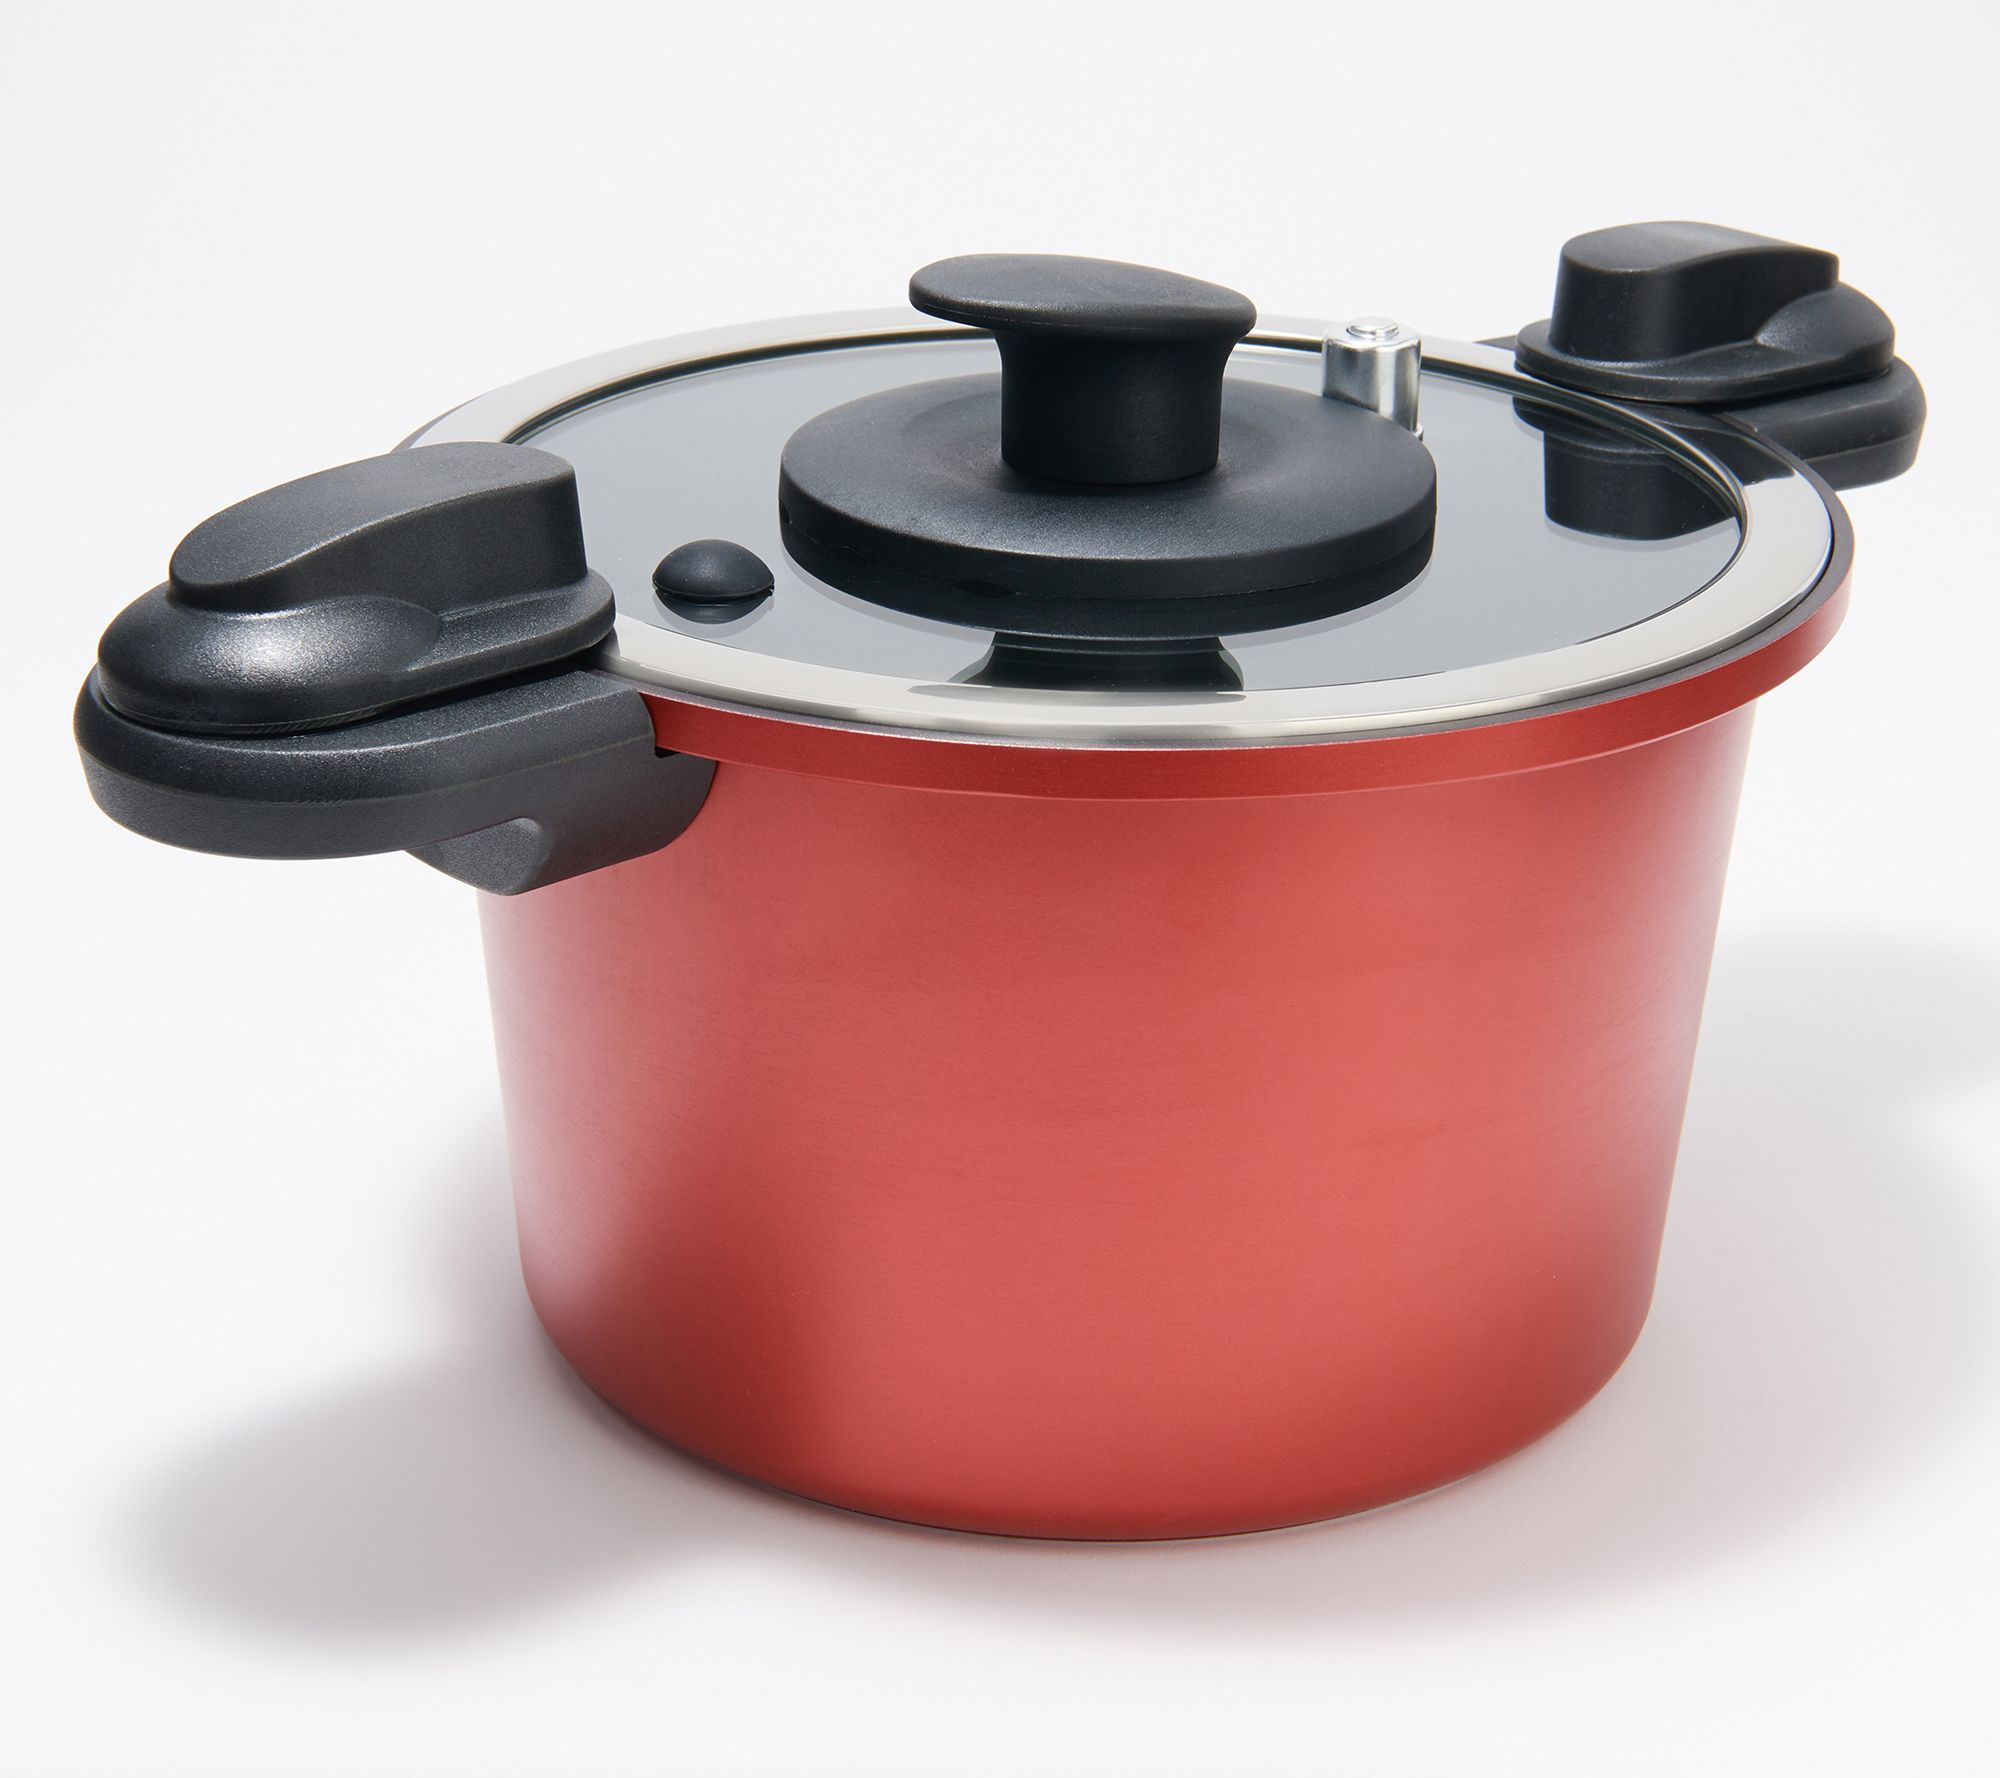 FAGOR Pressure Cookers- Removal and Replacement of Lid Handle